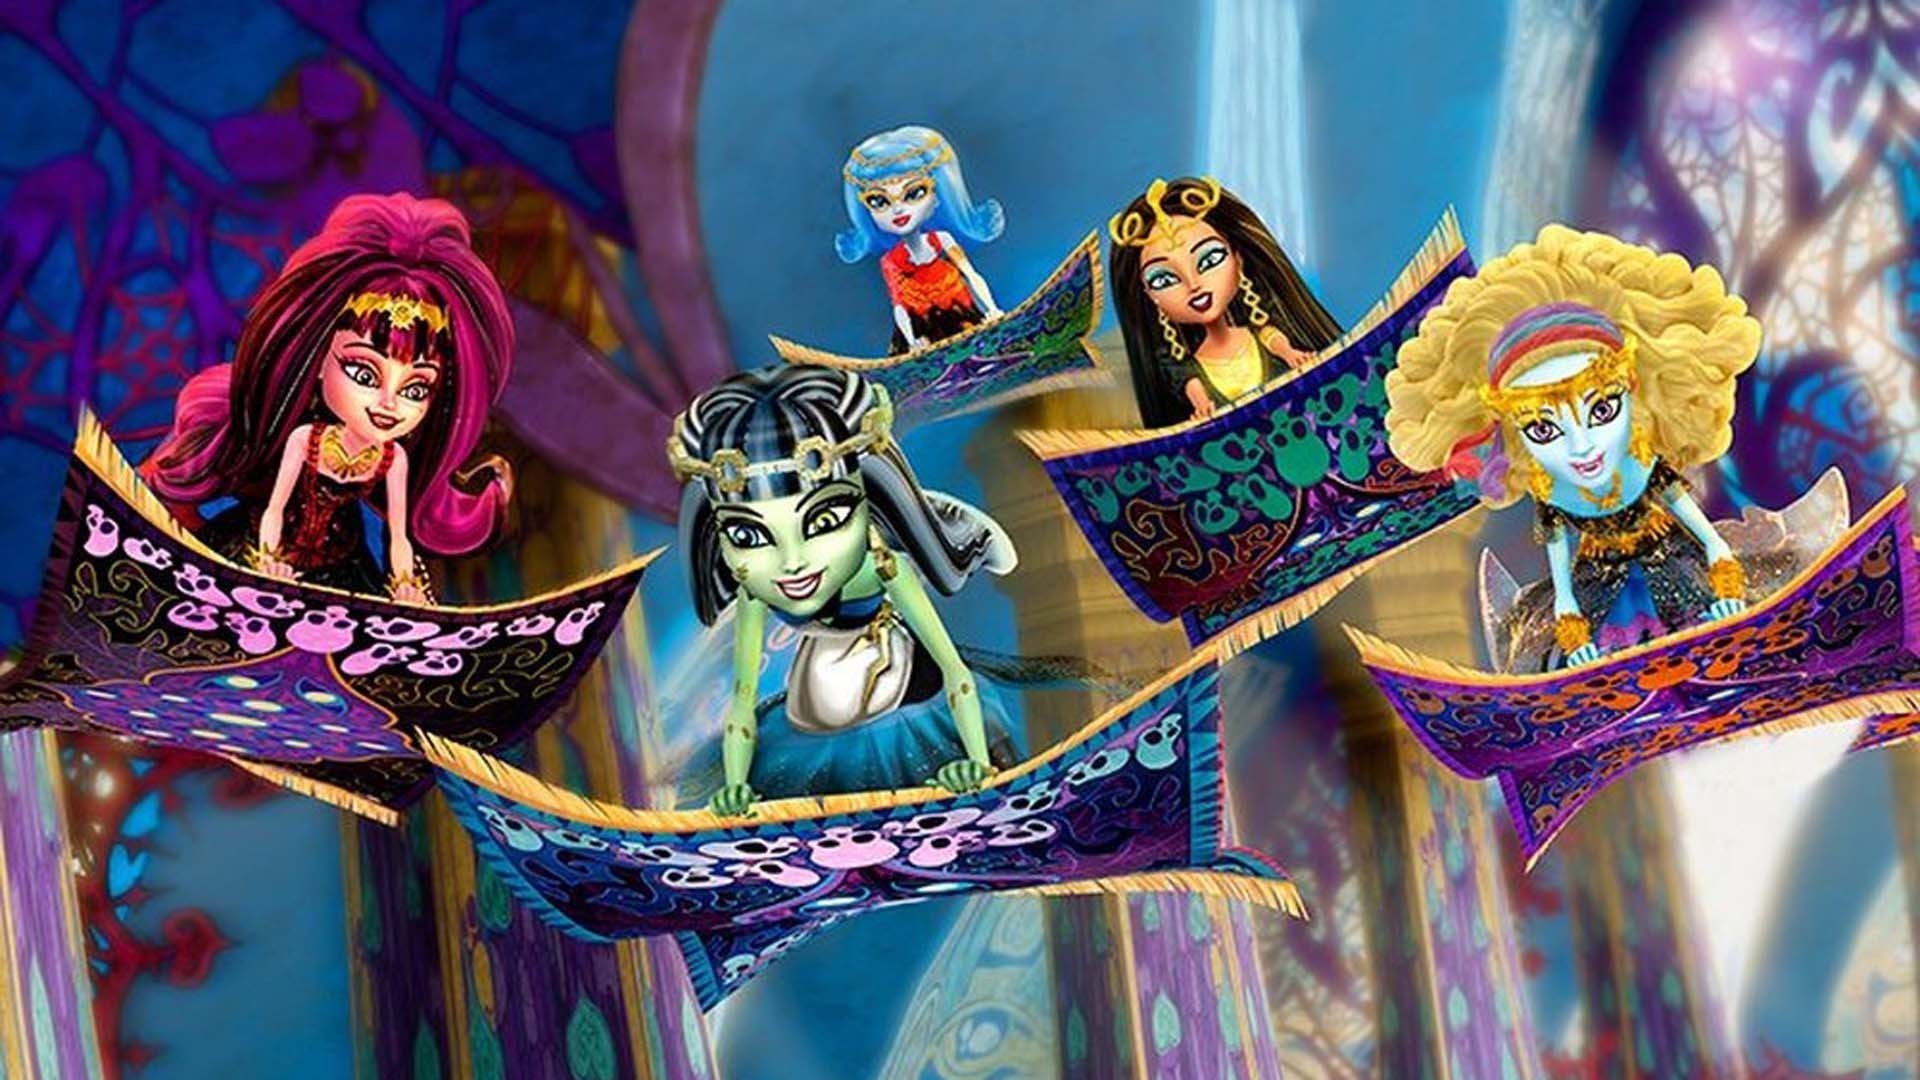 1920x1080 1 Monster High: 13 Wishes HD Wallpapers | Backgrounds - Wallpaper Abyss